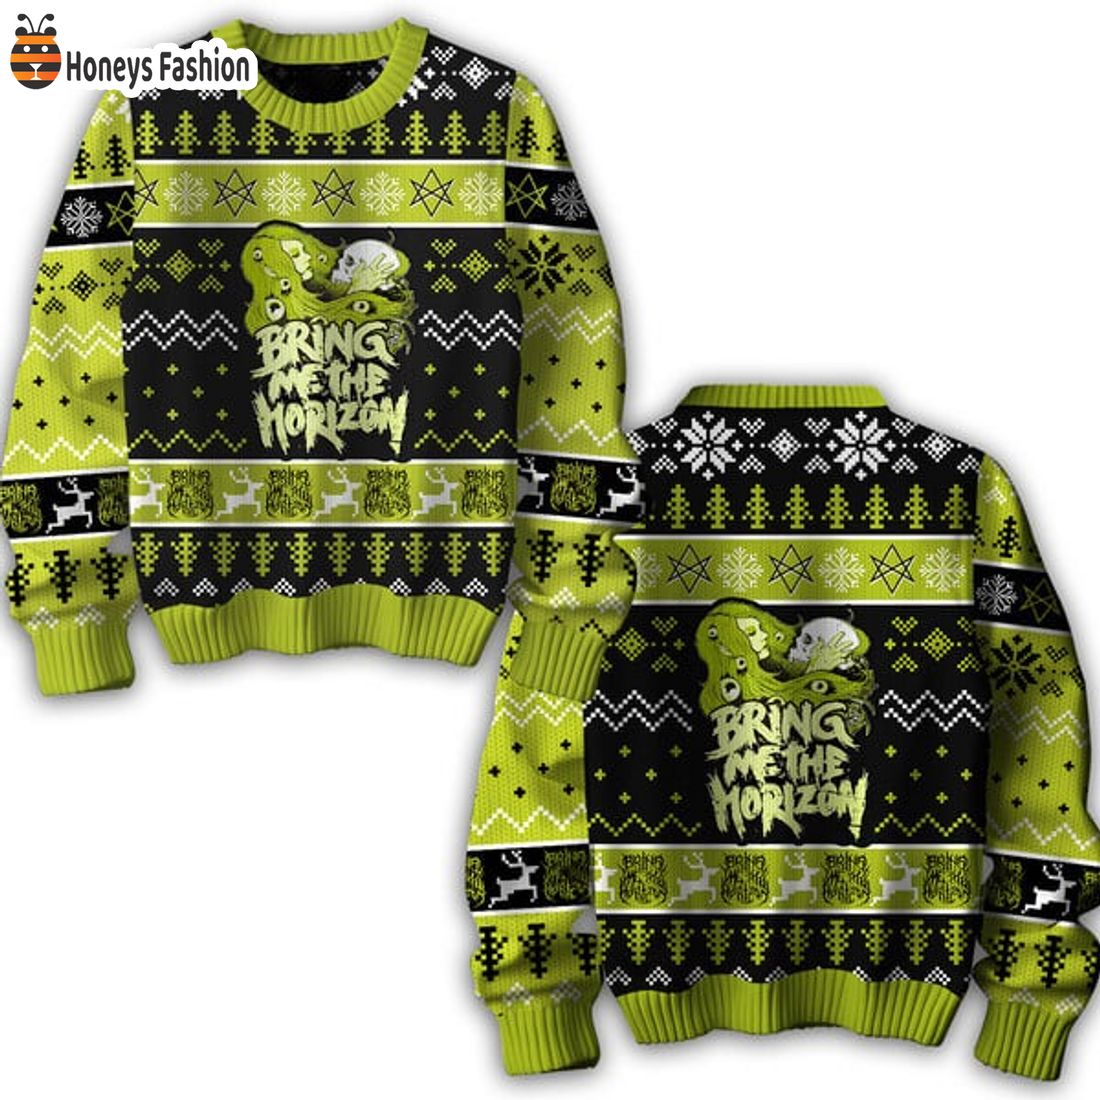 Bring Me the Horizon Rock Band Ugly Sweater